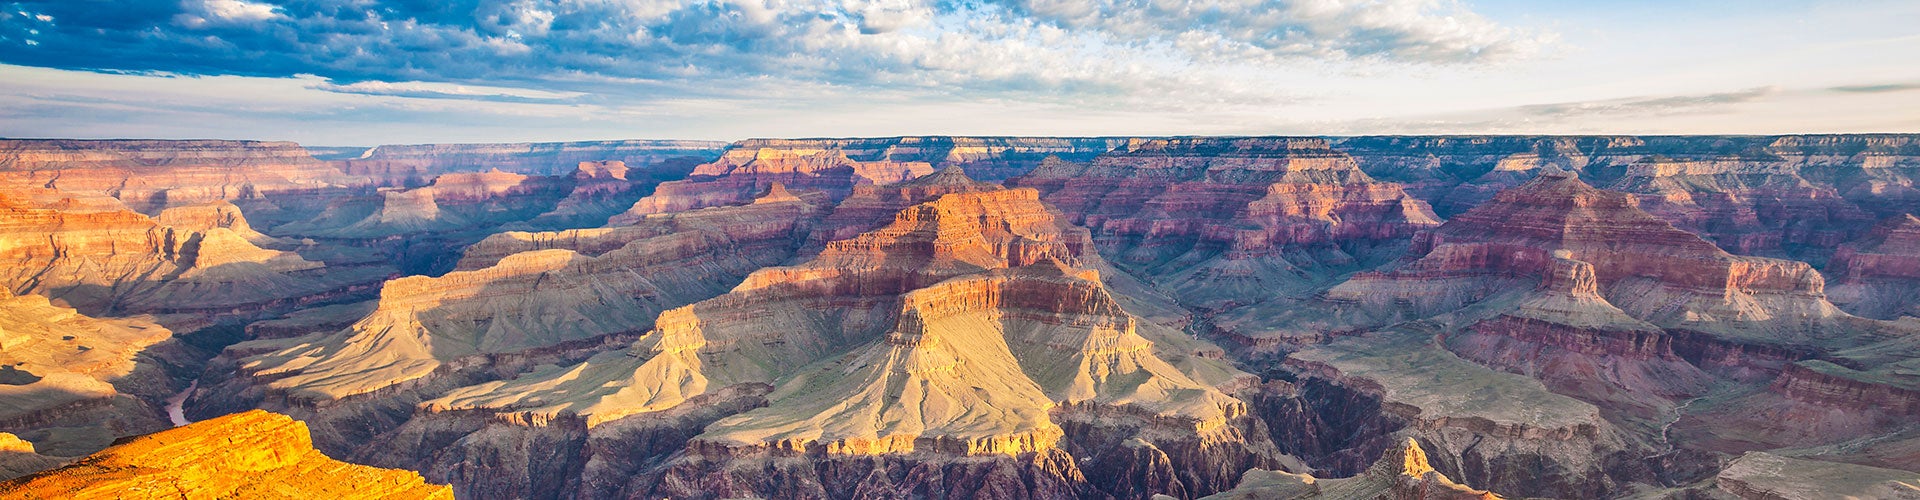 View of the Grand Canyon landscape surrounded by morning light